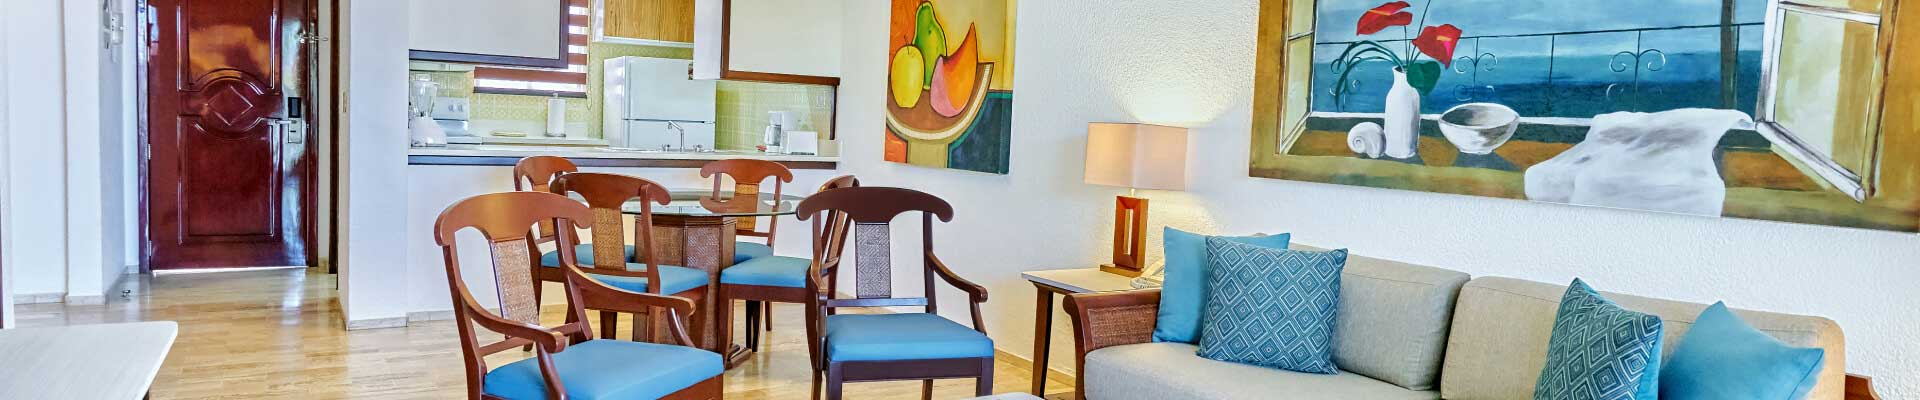 Family Villa Special Promotion in Cancun and Riviera Maya